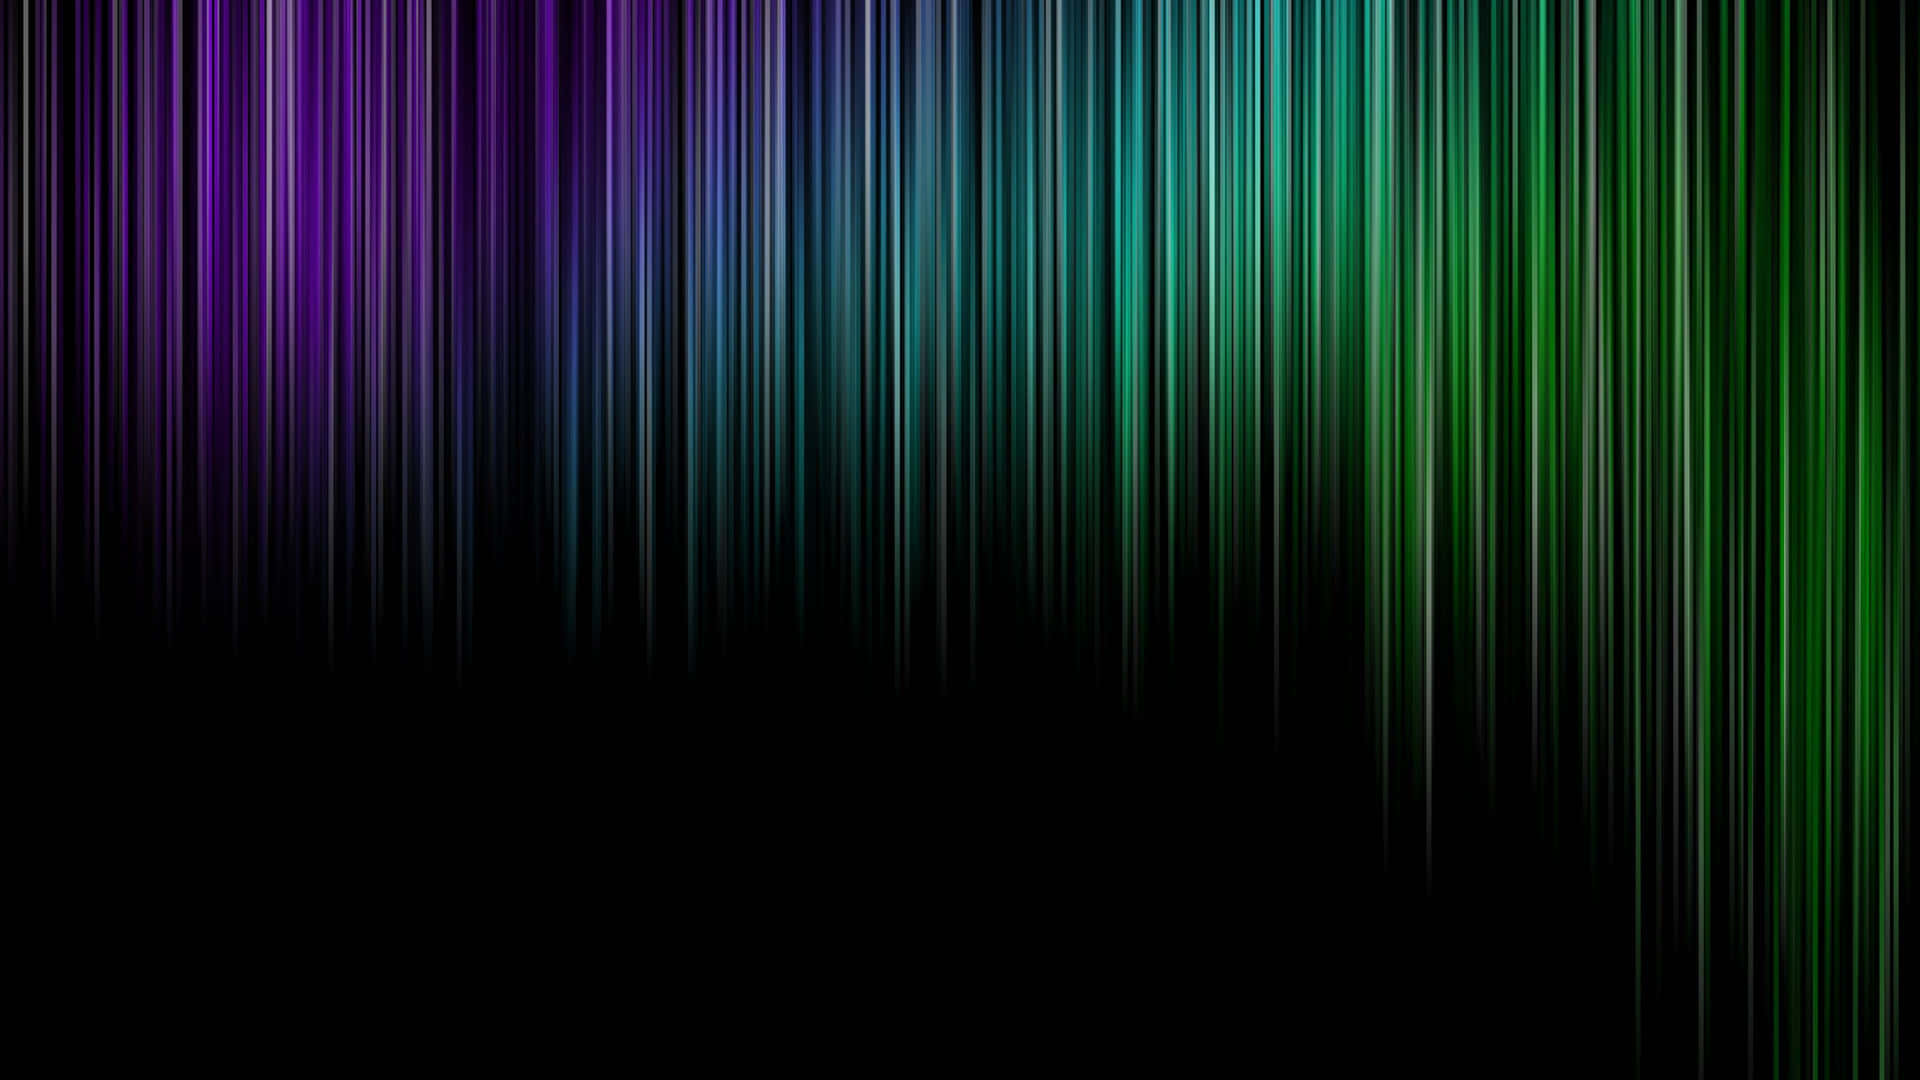 A Colorful Pattern of Purple and Green